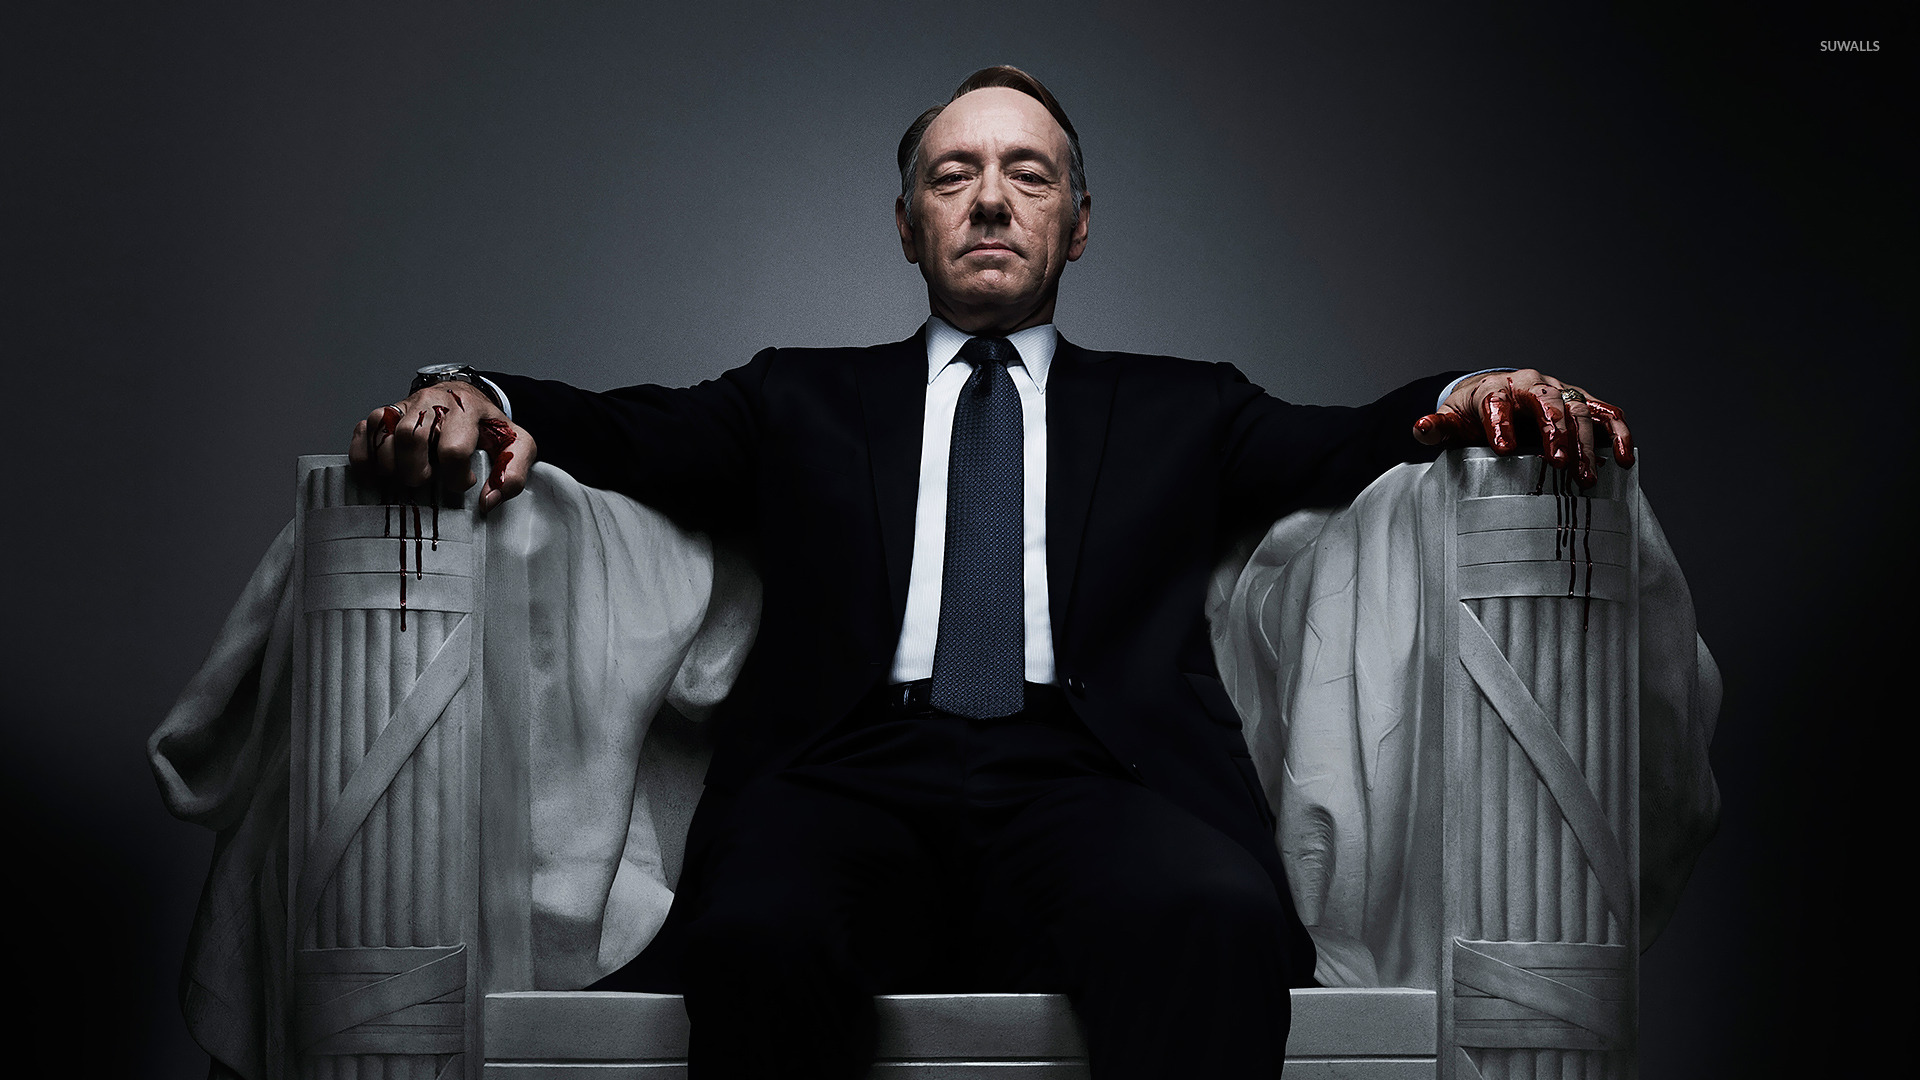 House of Cards wallpaper   TV Show wallpapers   20237 1920x1080